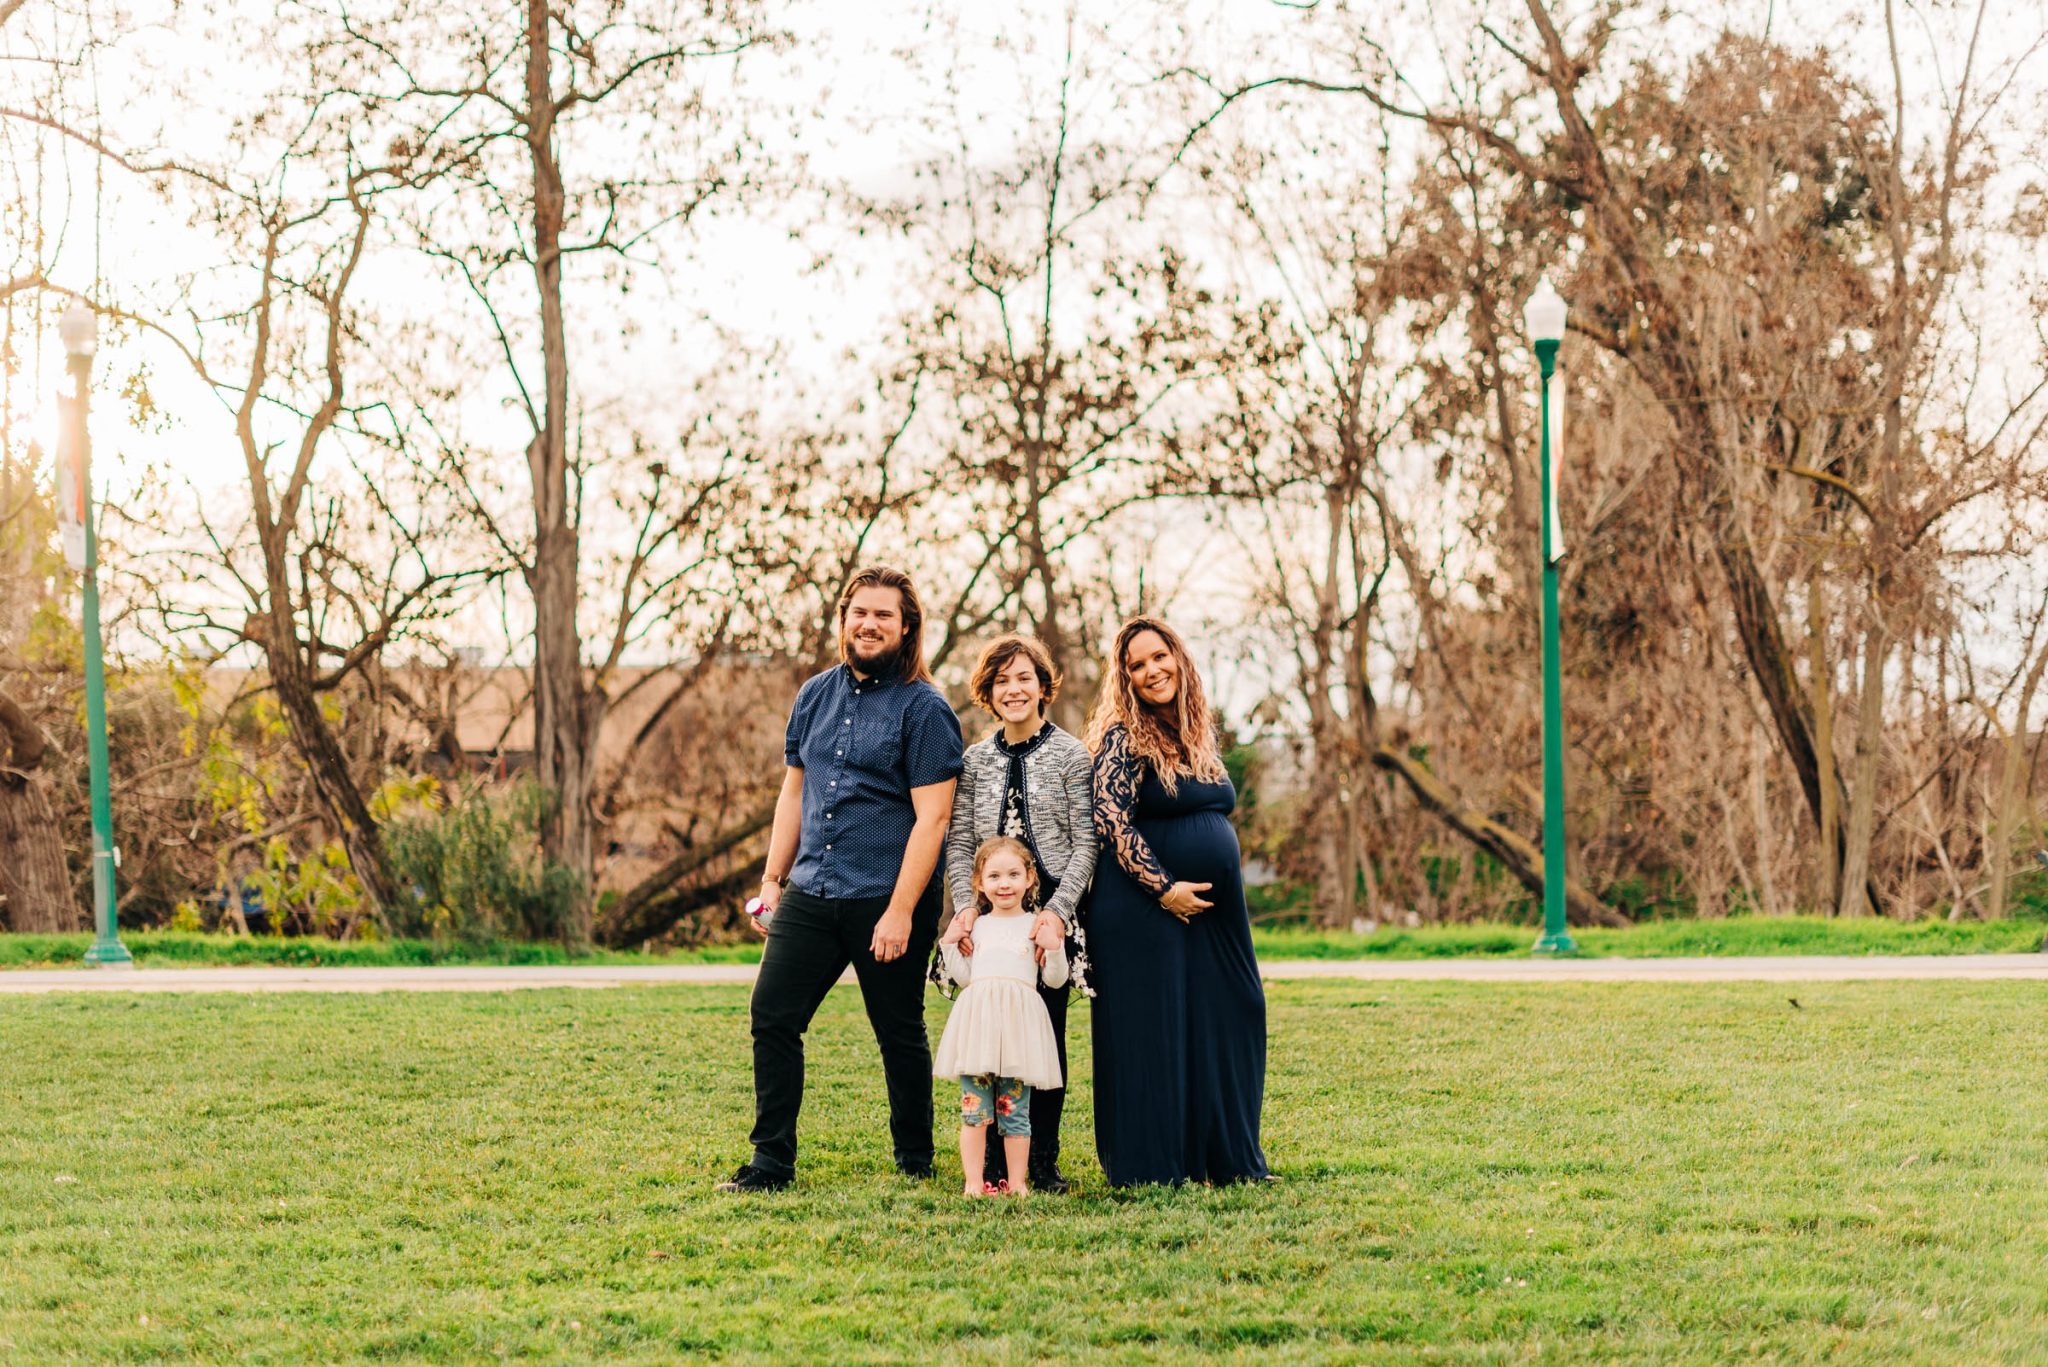 Alana Gender Reveal and Maternity Session in San Jose